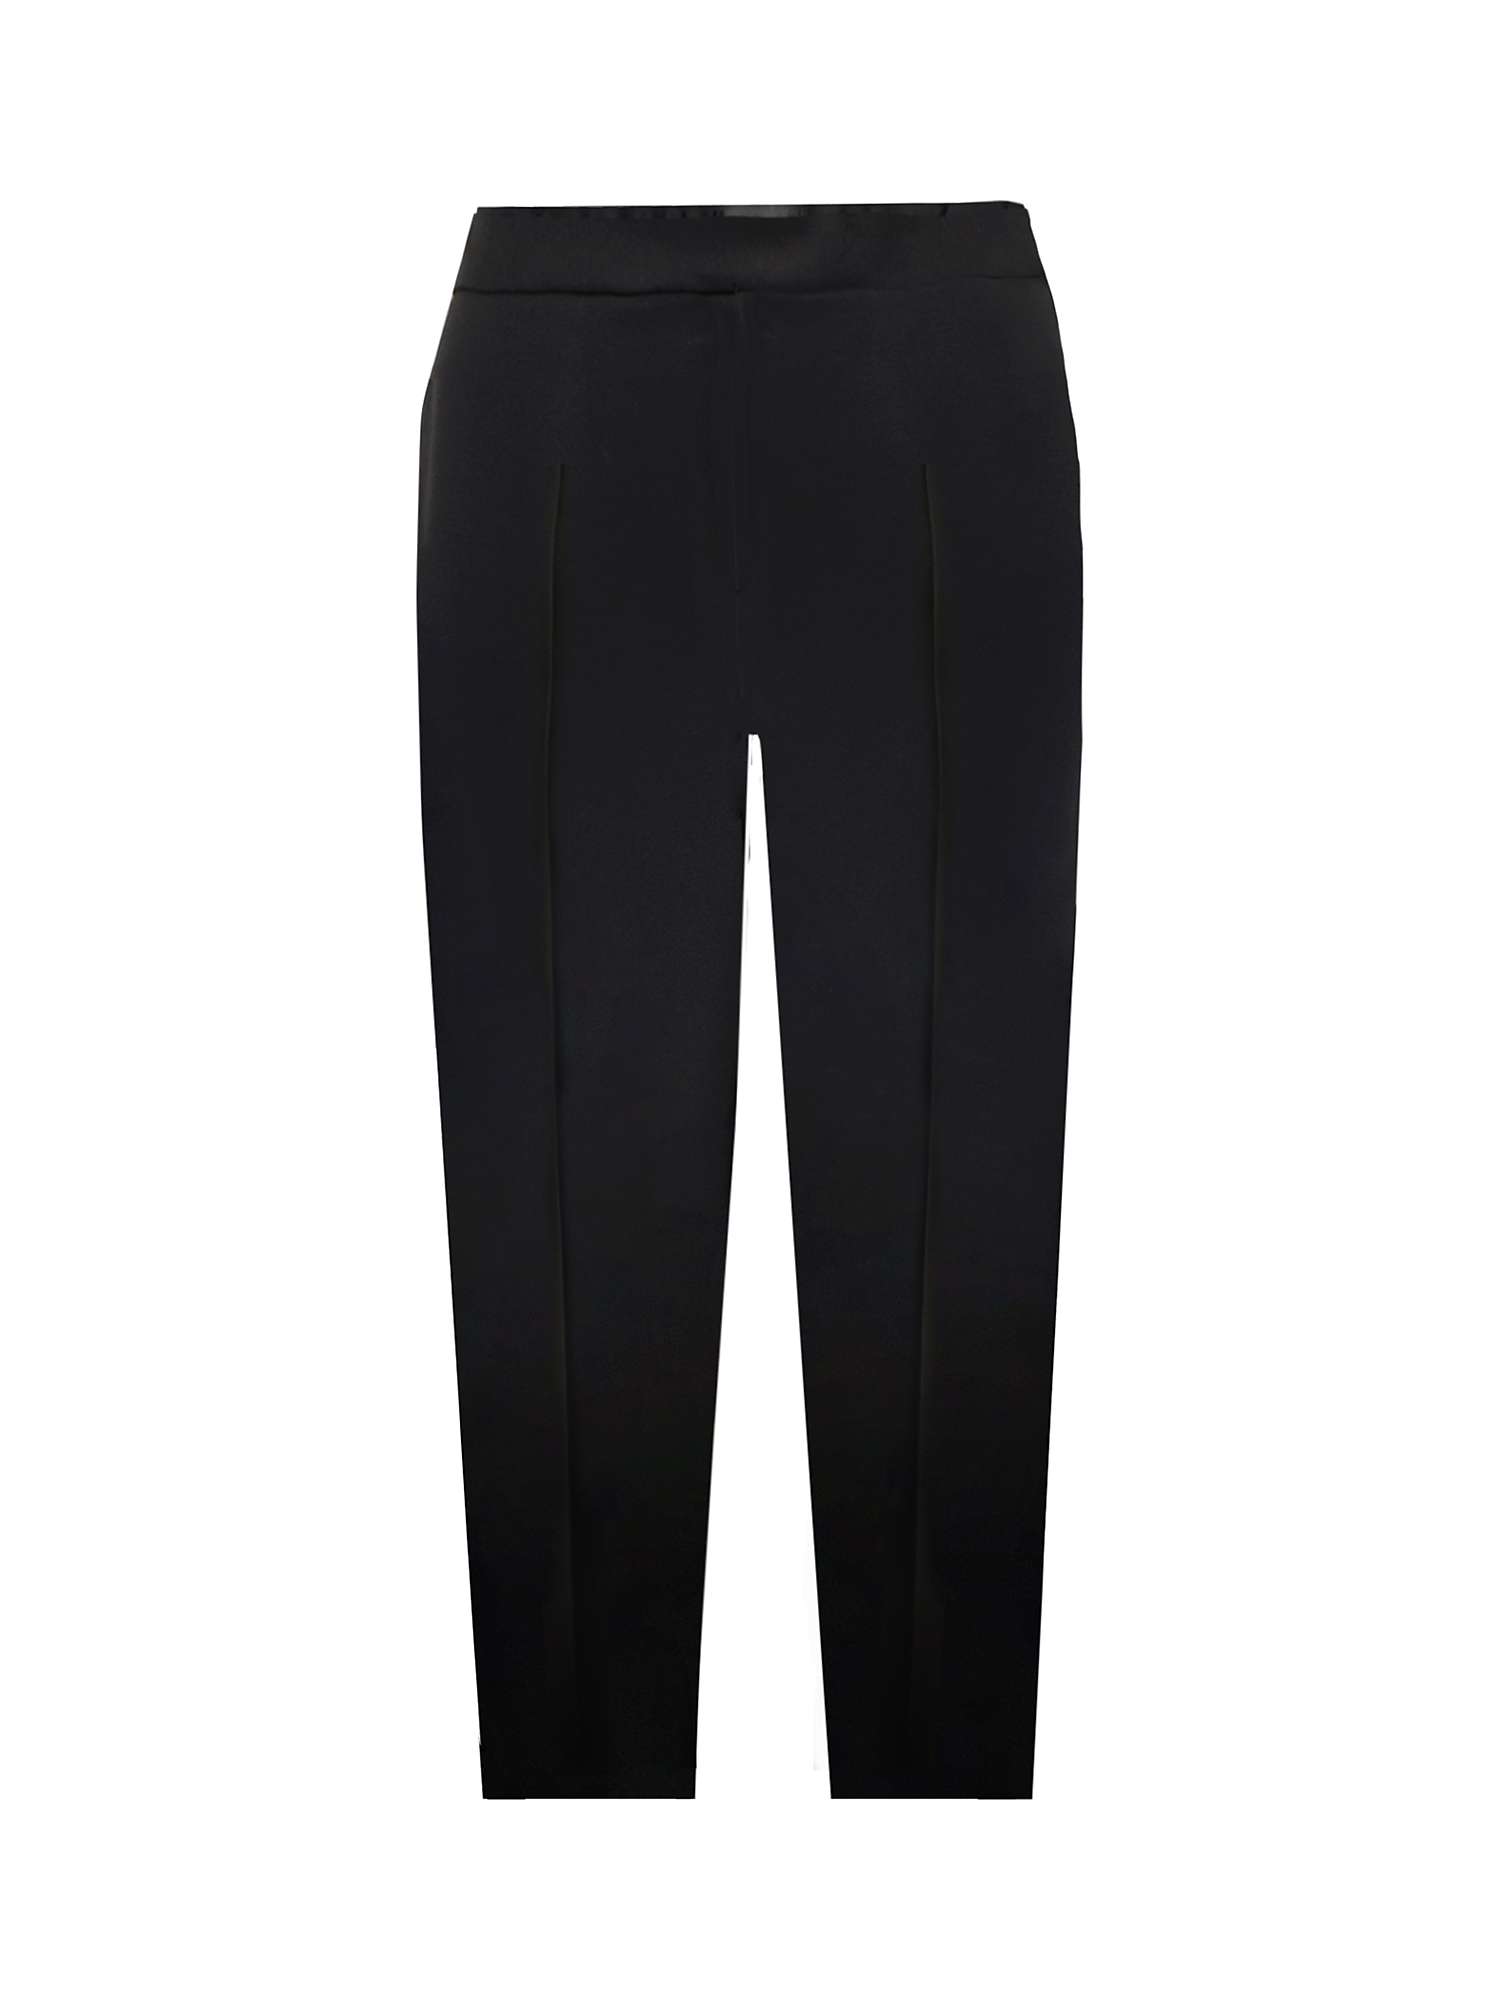 Buy Live Unlimited Straight Cut Trousers, Black Online at johnlewis.com